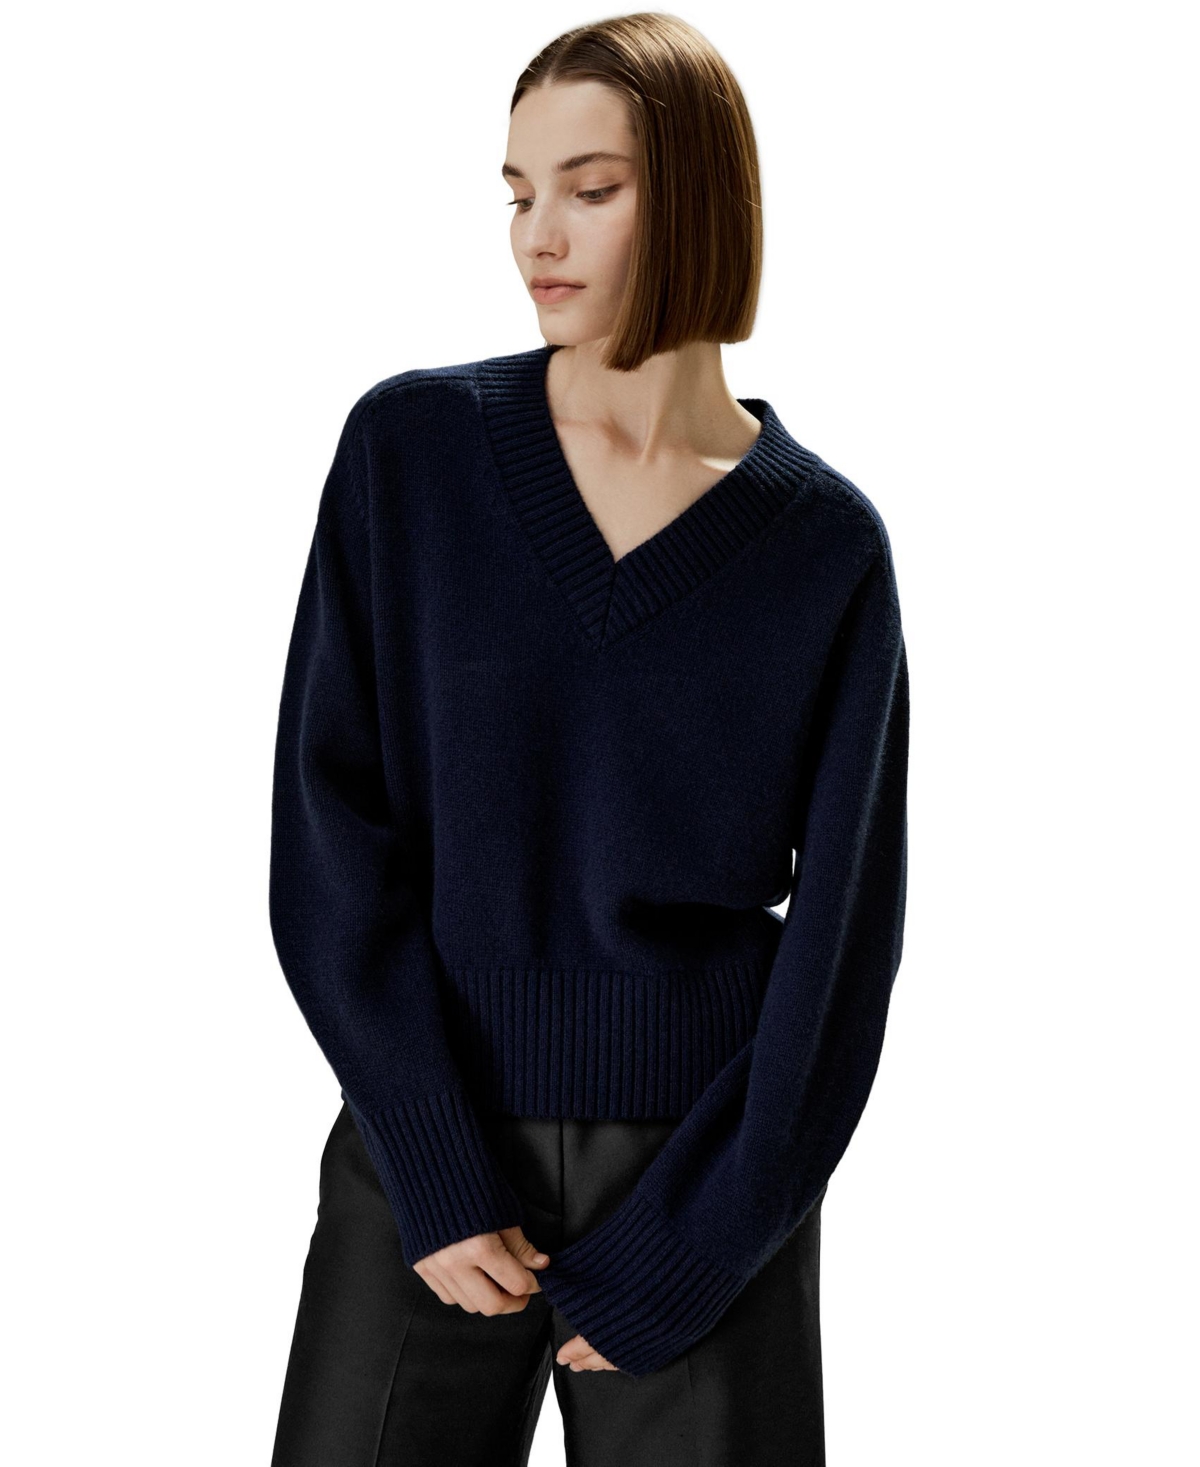 V-Neck Relaxed Fit Wool Cashmere Blend Sweater for Women - Navy blue